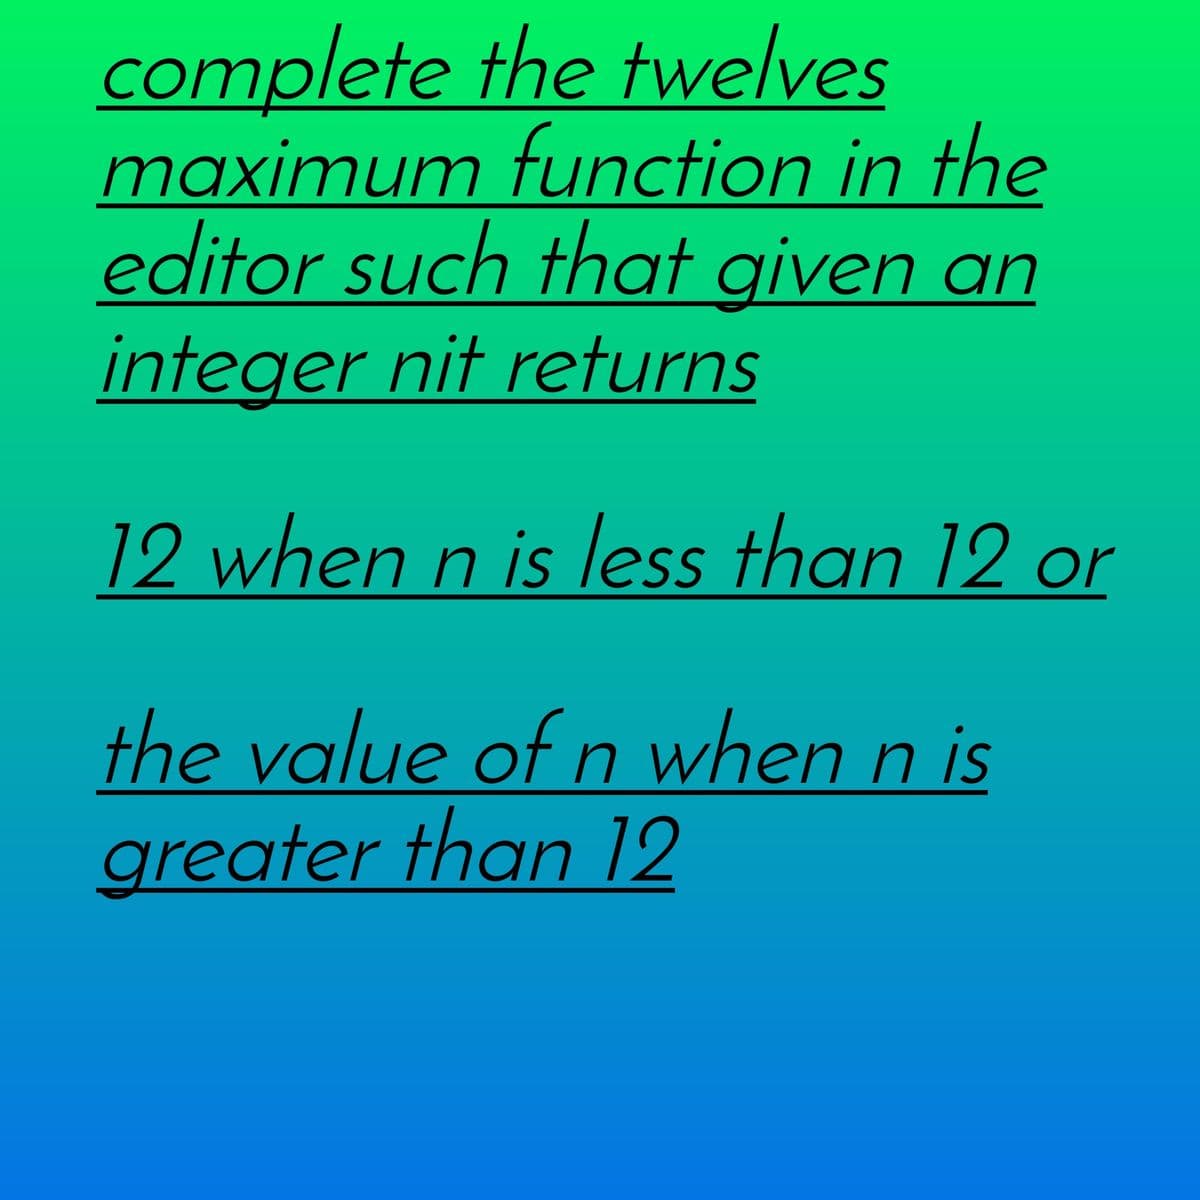 complete the twelves
maximum function in the
editor such that given an
integer nit returns
12 when n is less than 12 or
the value of n when n is
greater than 12